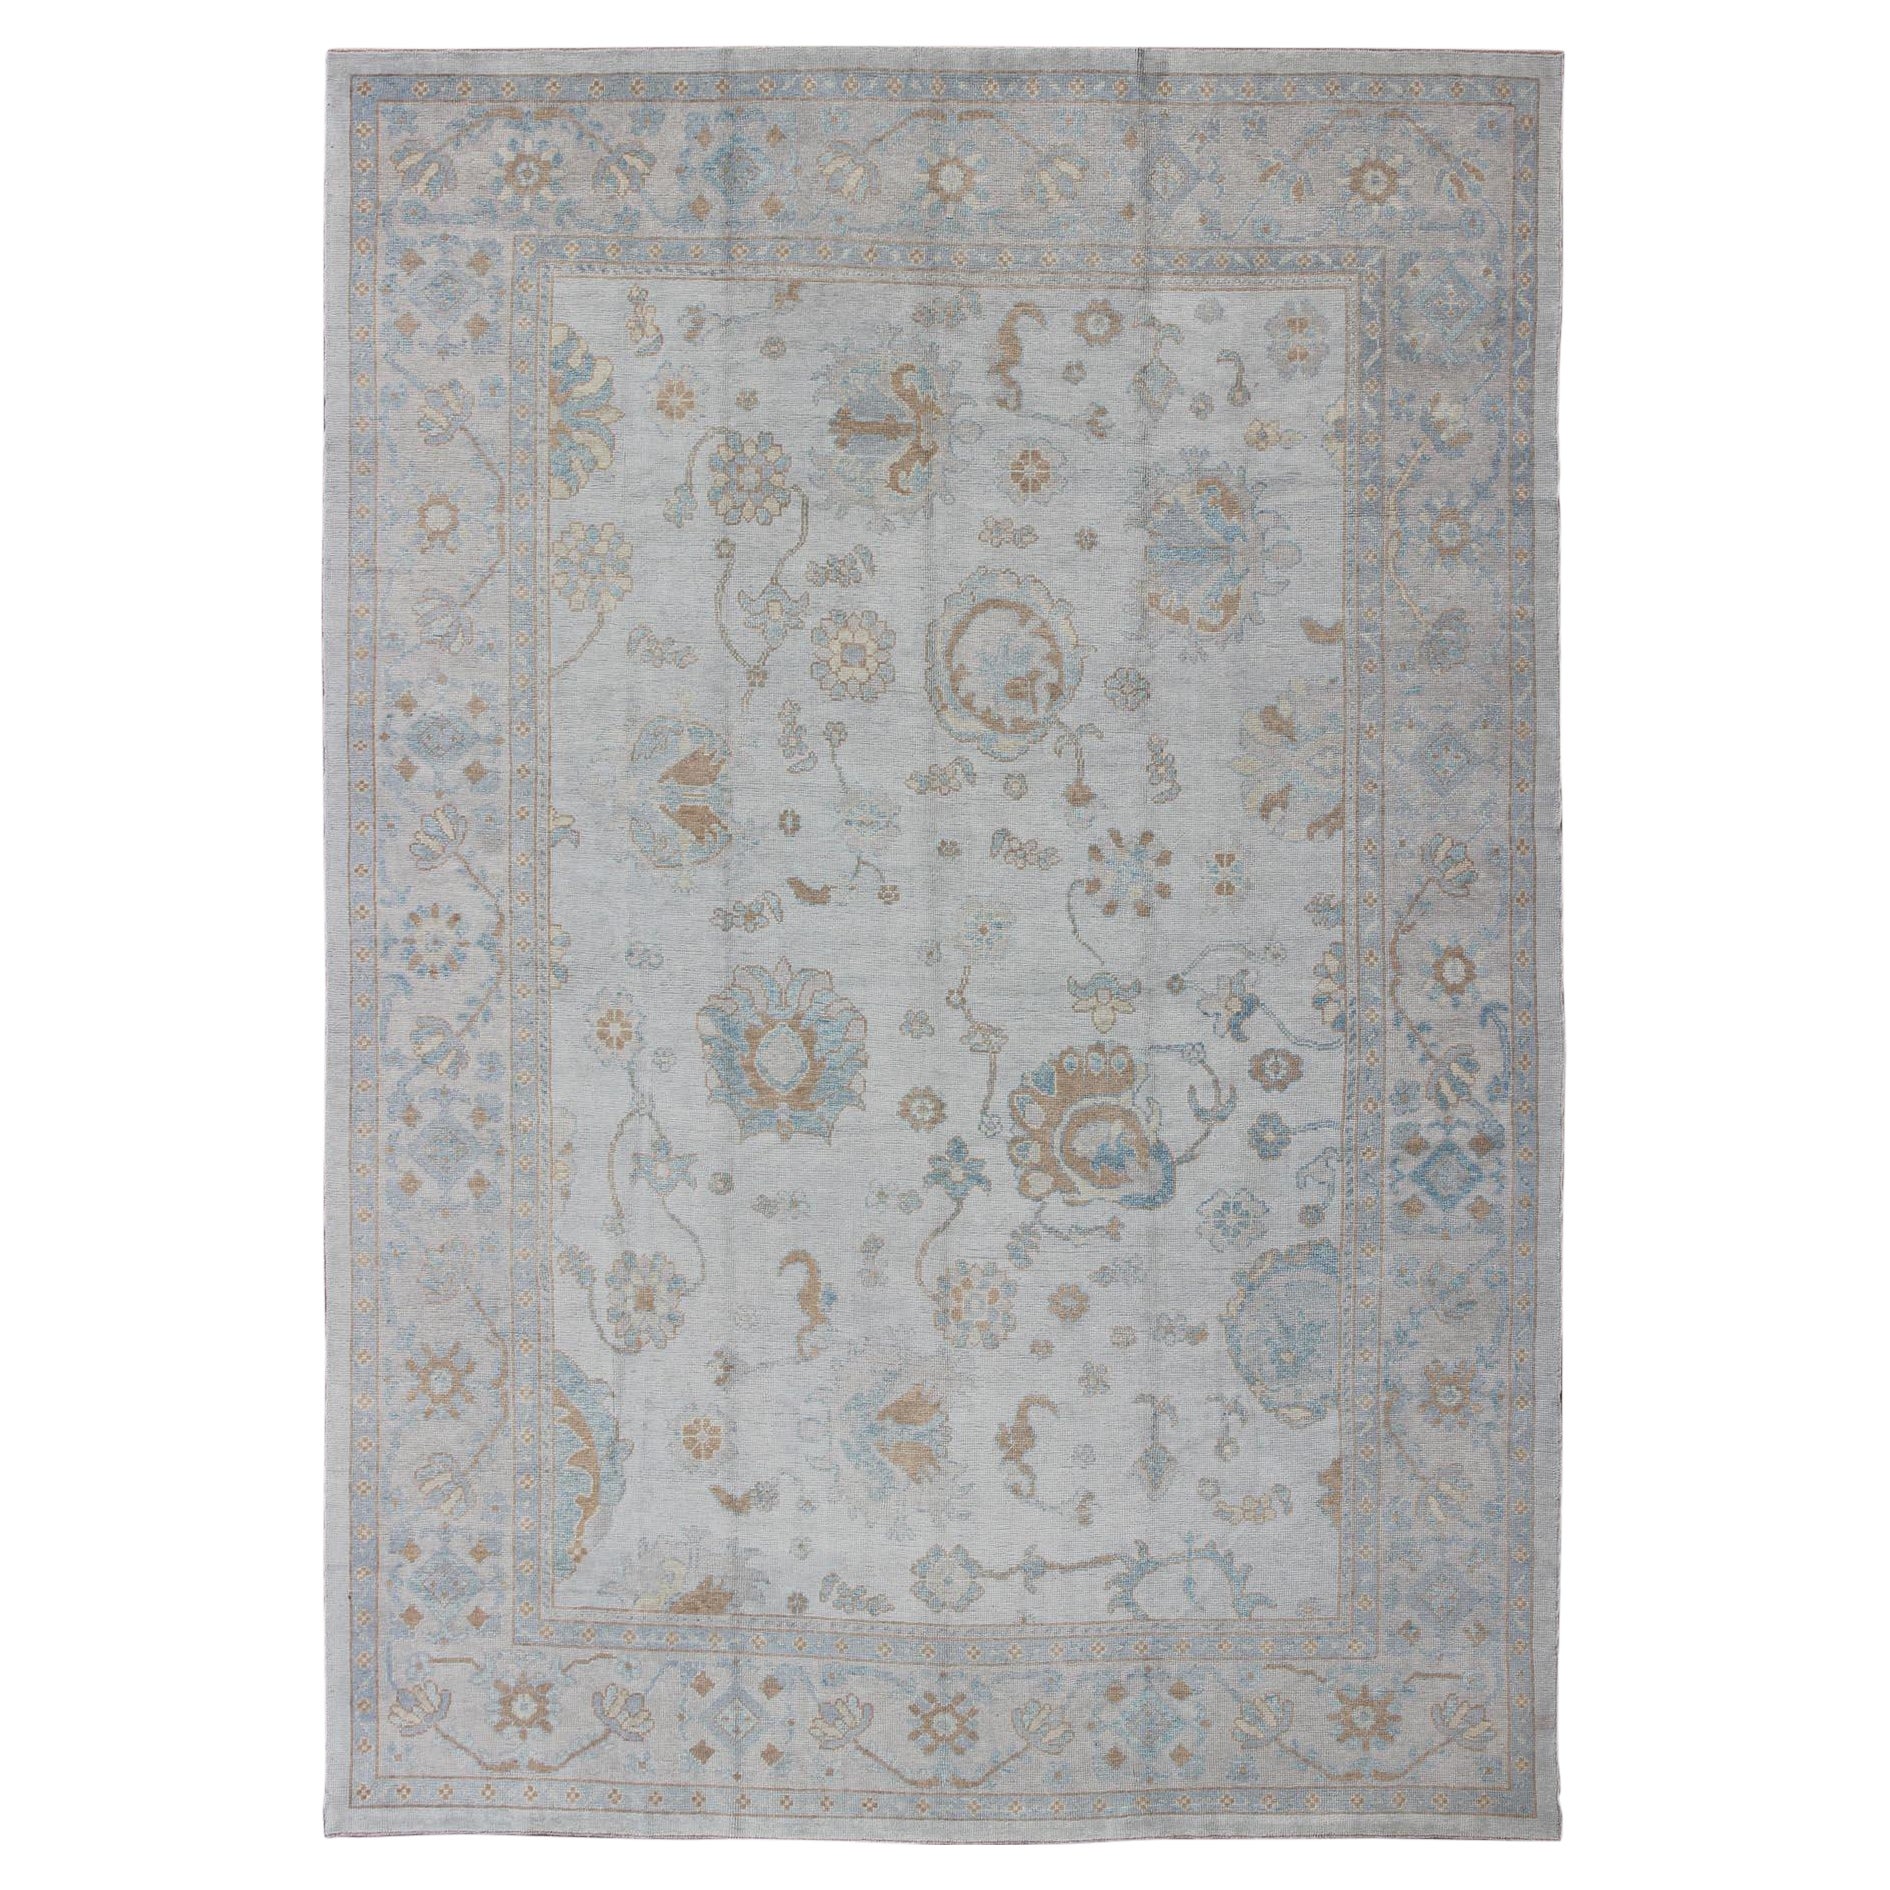 Large Turkish Oushak Rug with Neutral Color Palette in Off-White, Light Blue For Sale